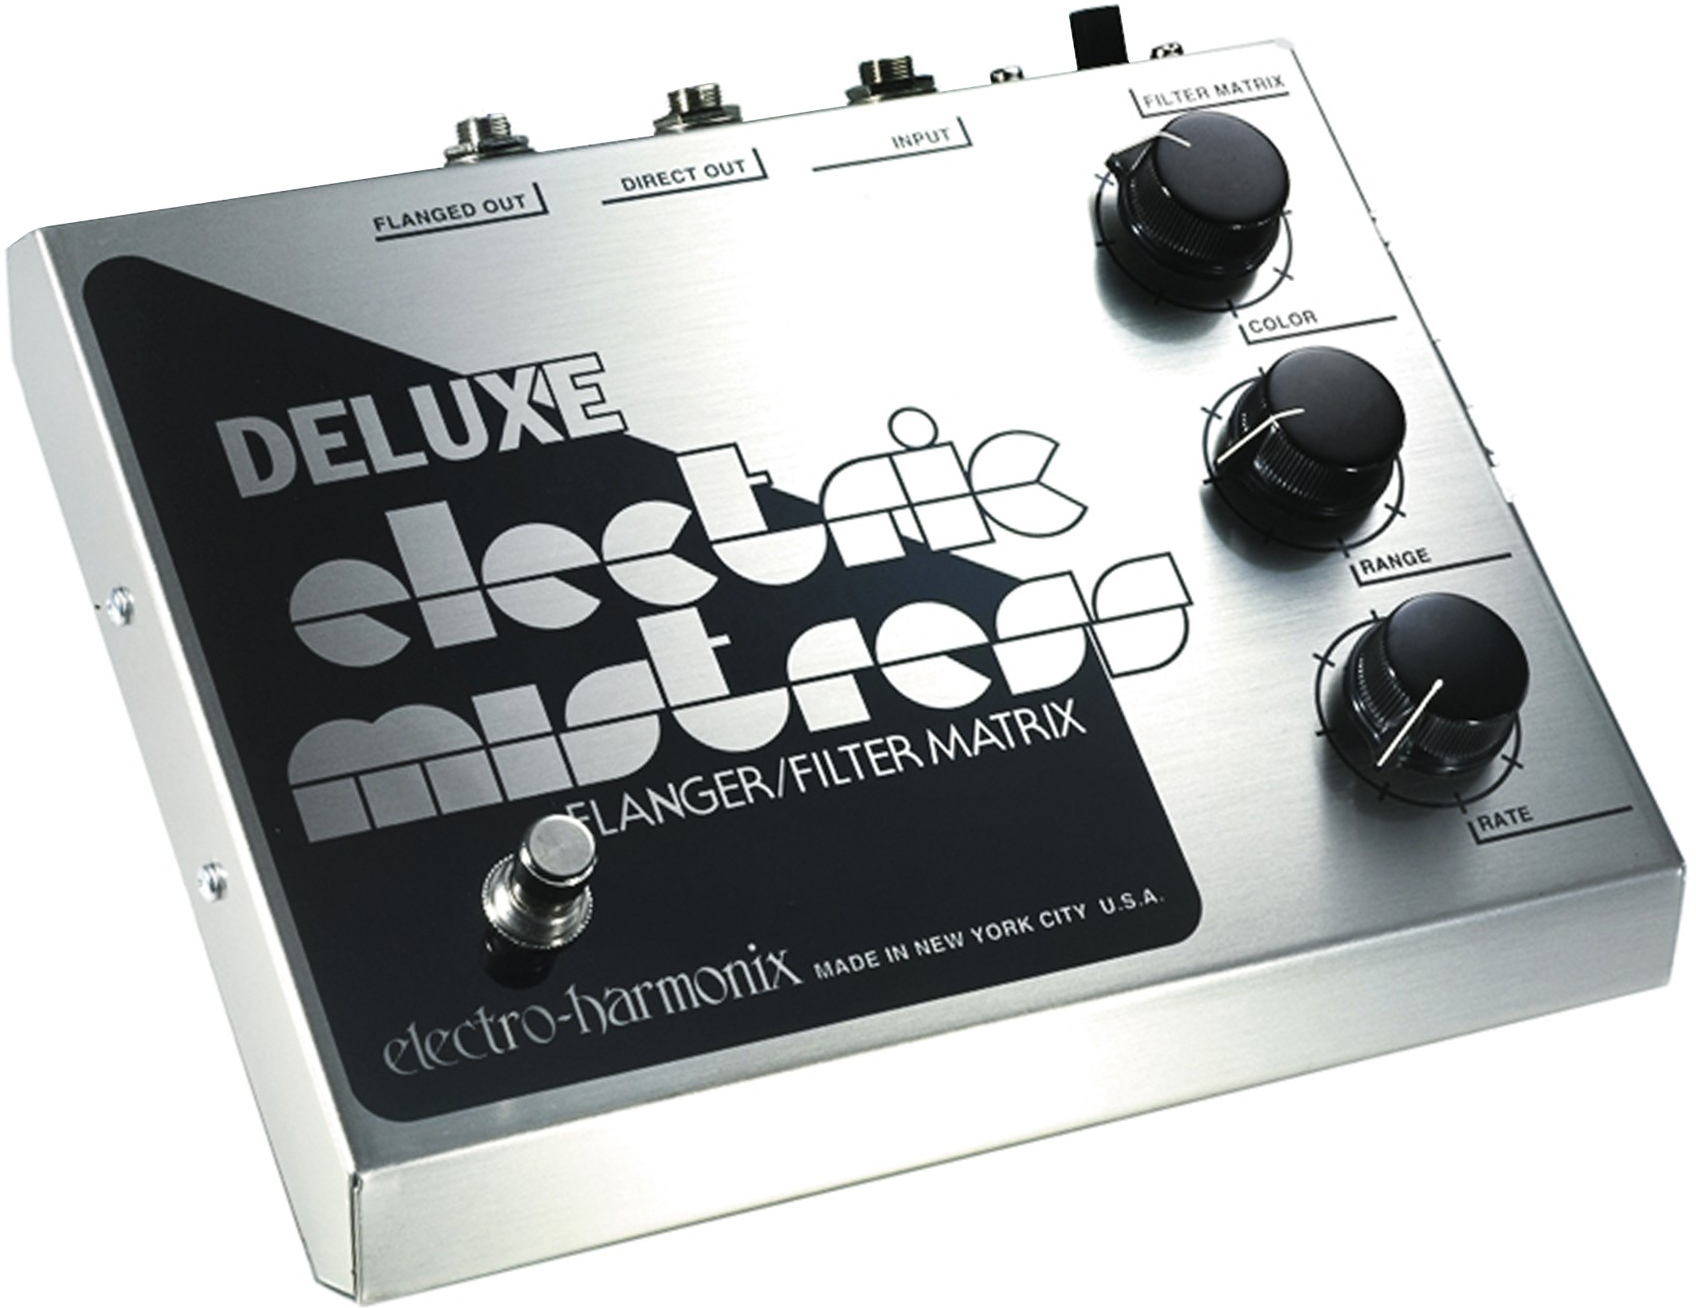 Deluxe Electric Mistress